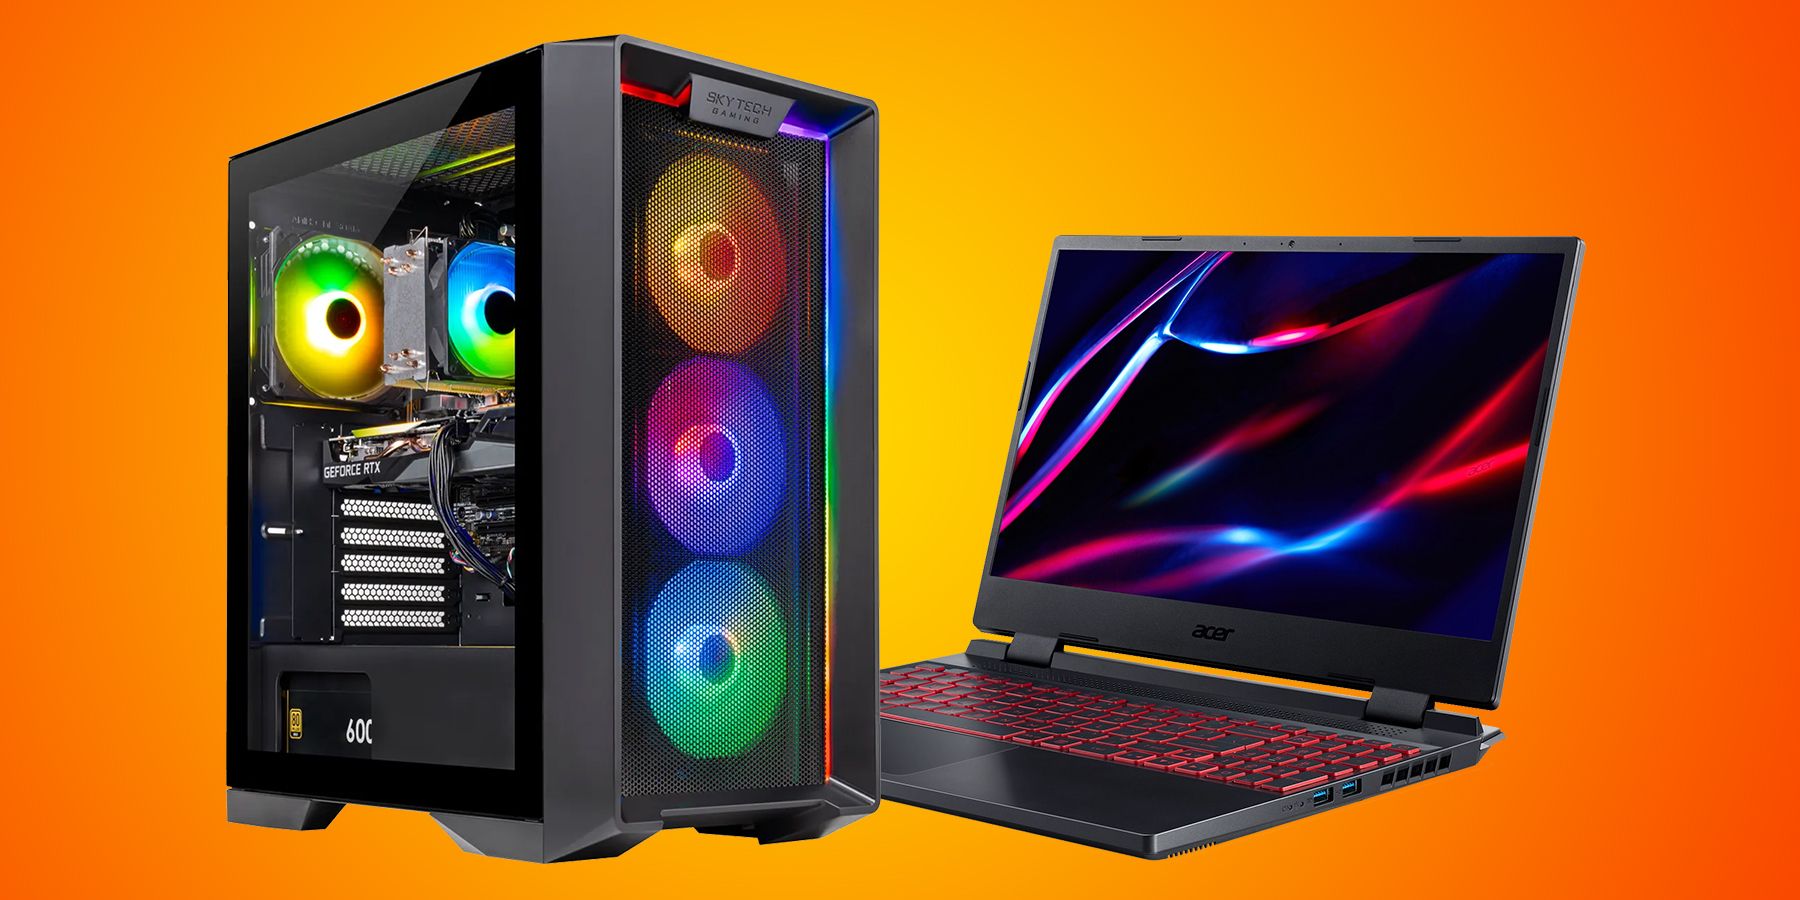 How Much is a Gaming Laptop vs a Gaming PC?